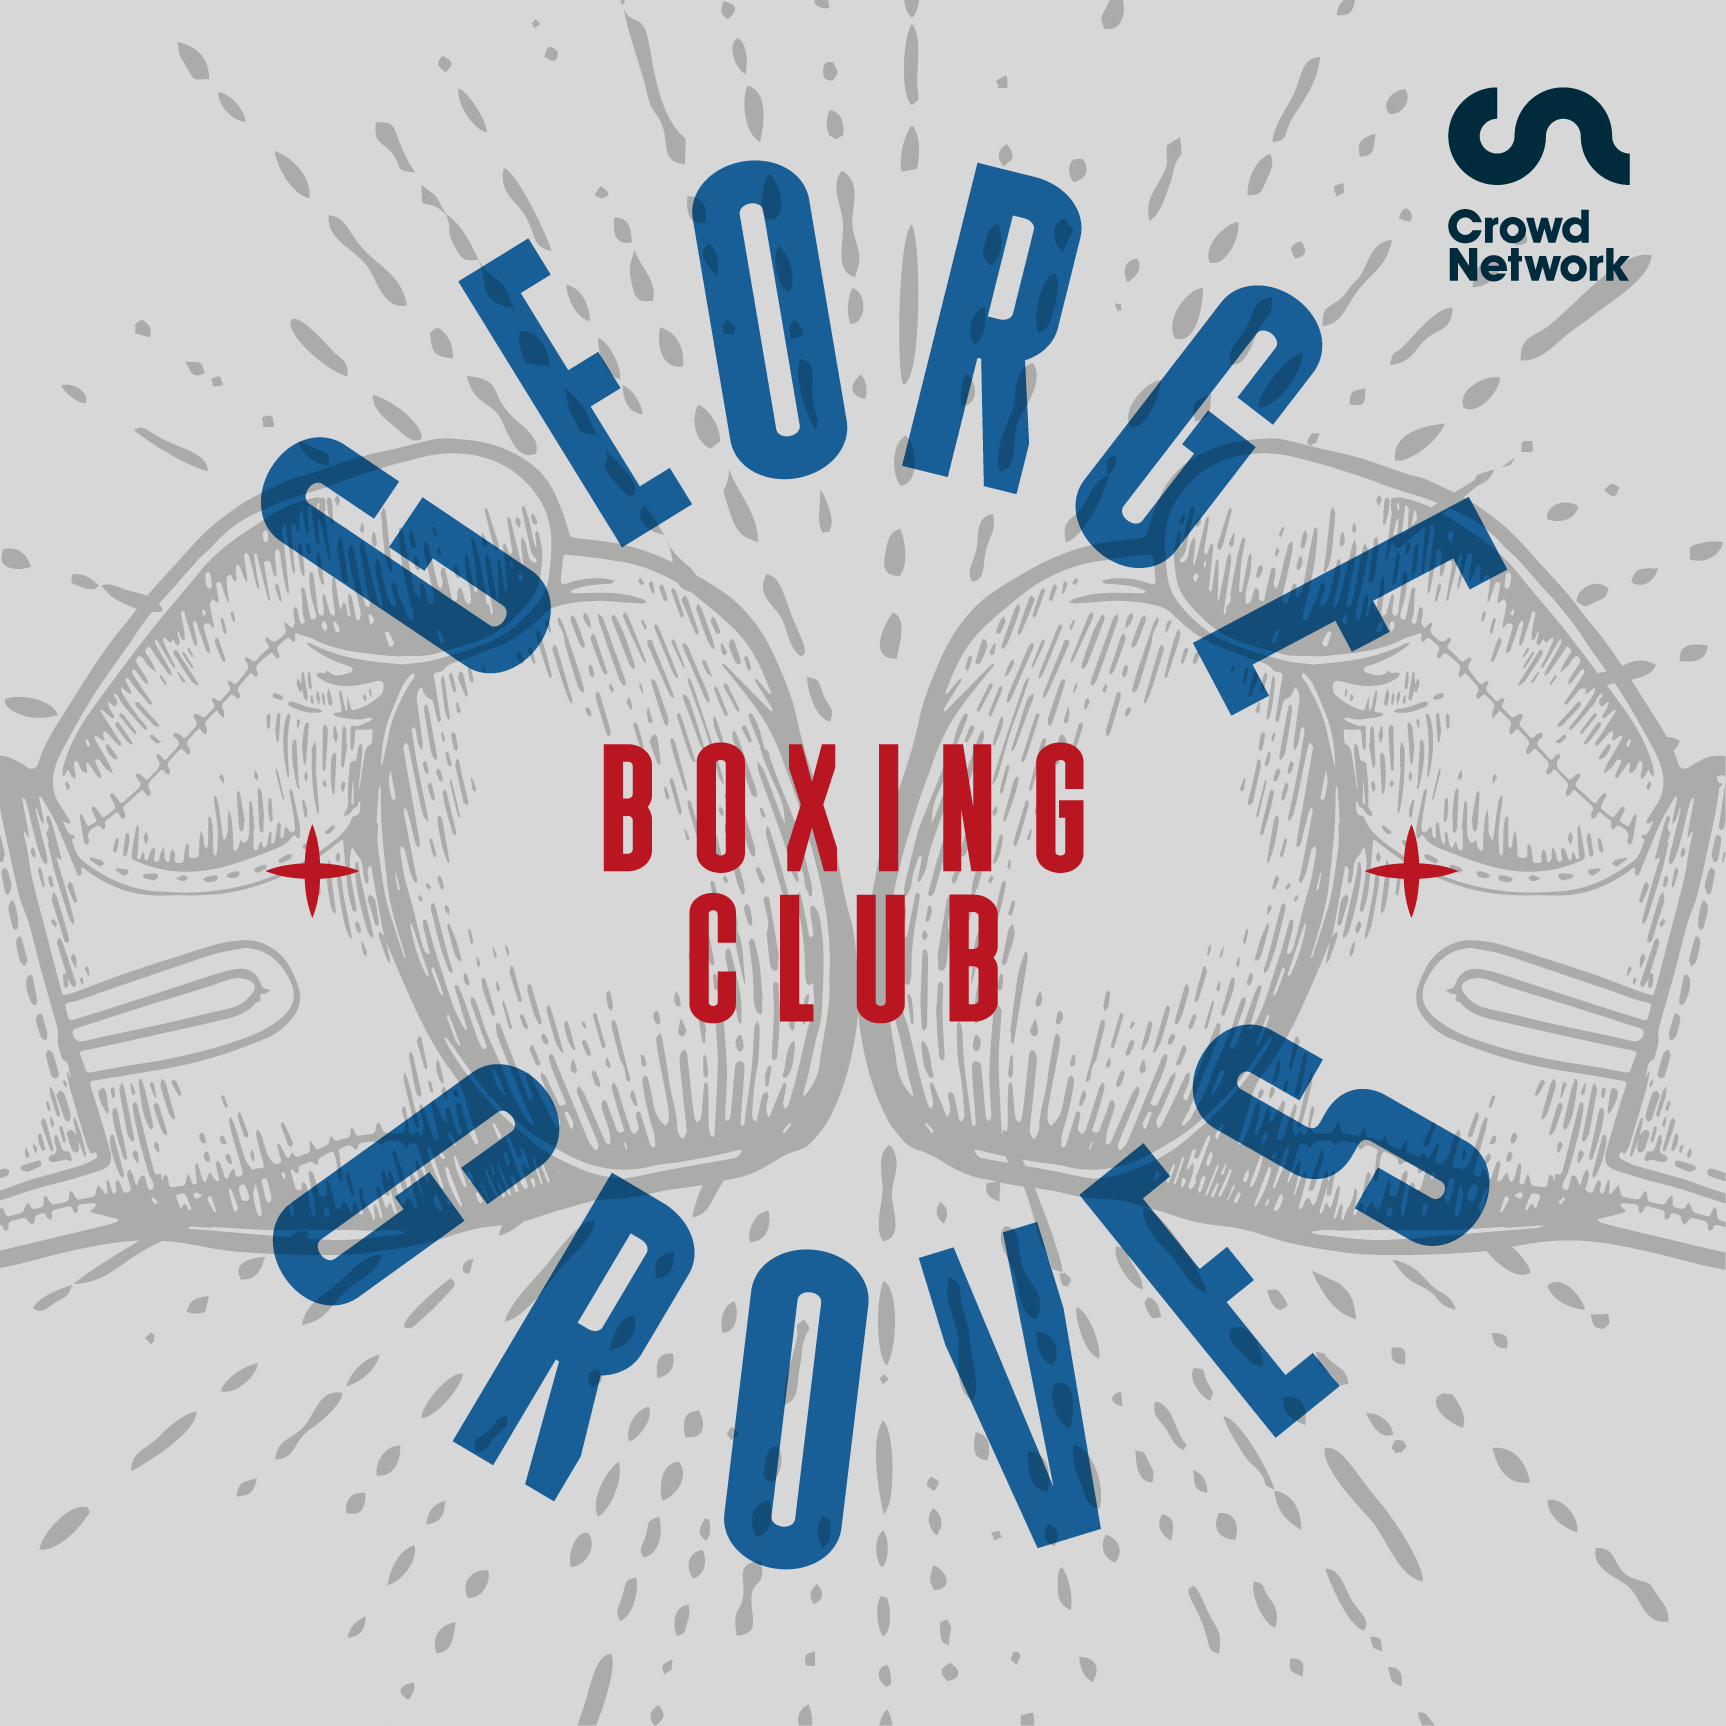 The George Groves Boxing Club